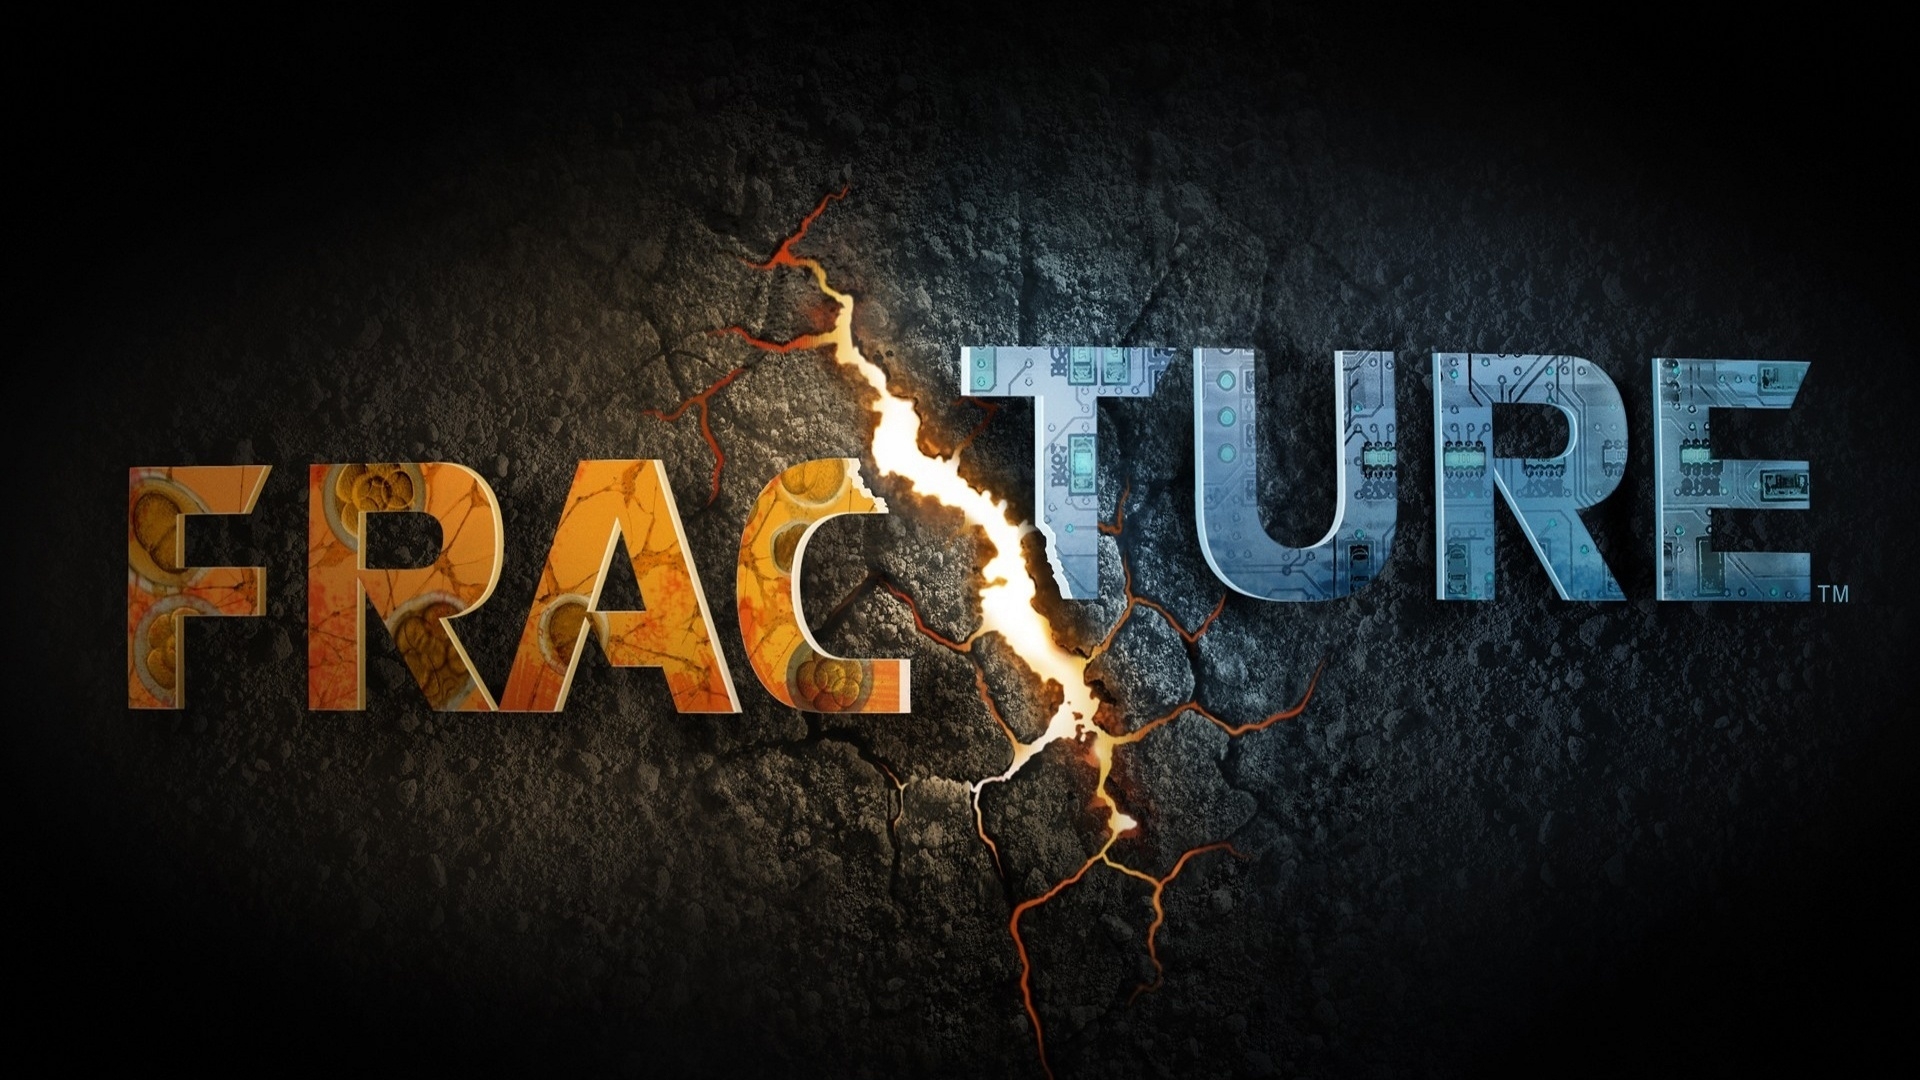 Fracture for 1920 x 1080 HDTV 1080p resolution